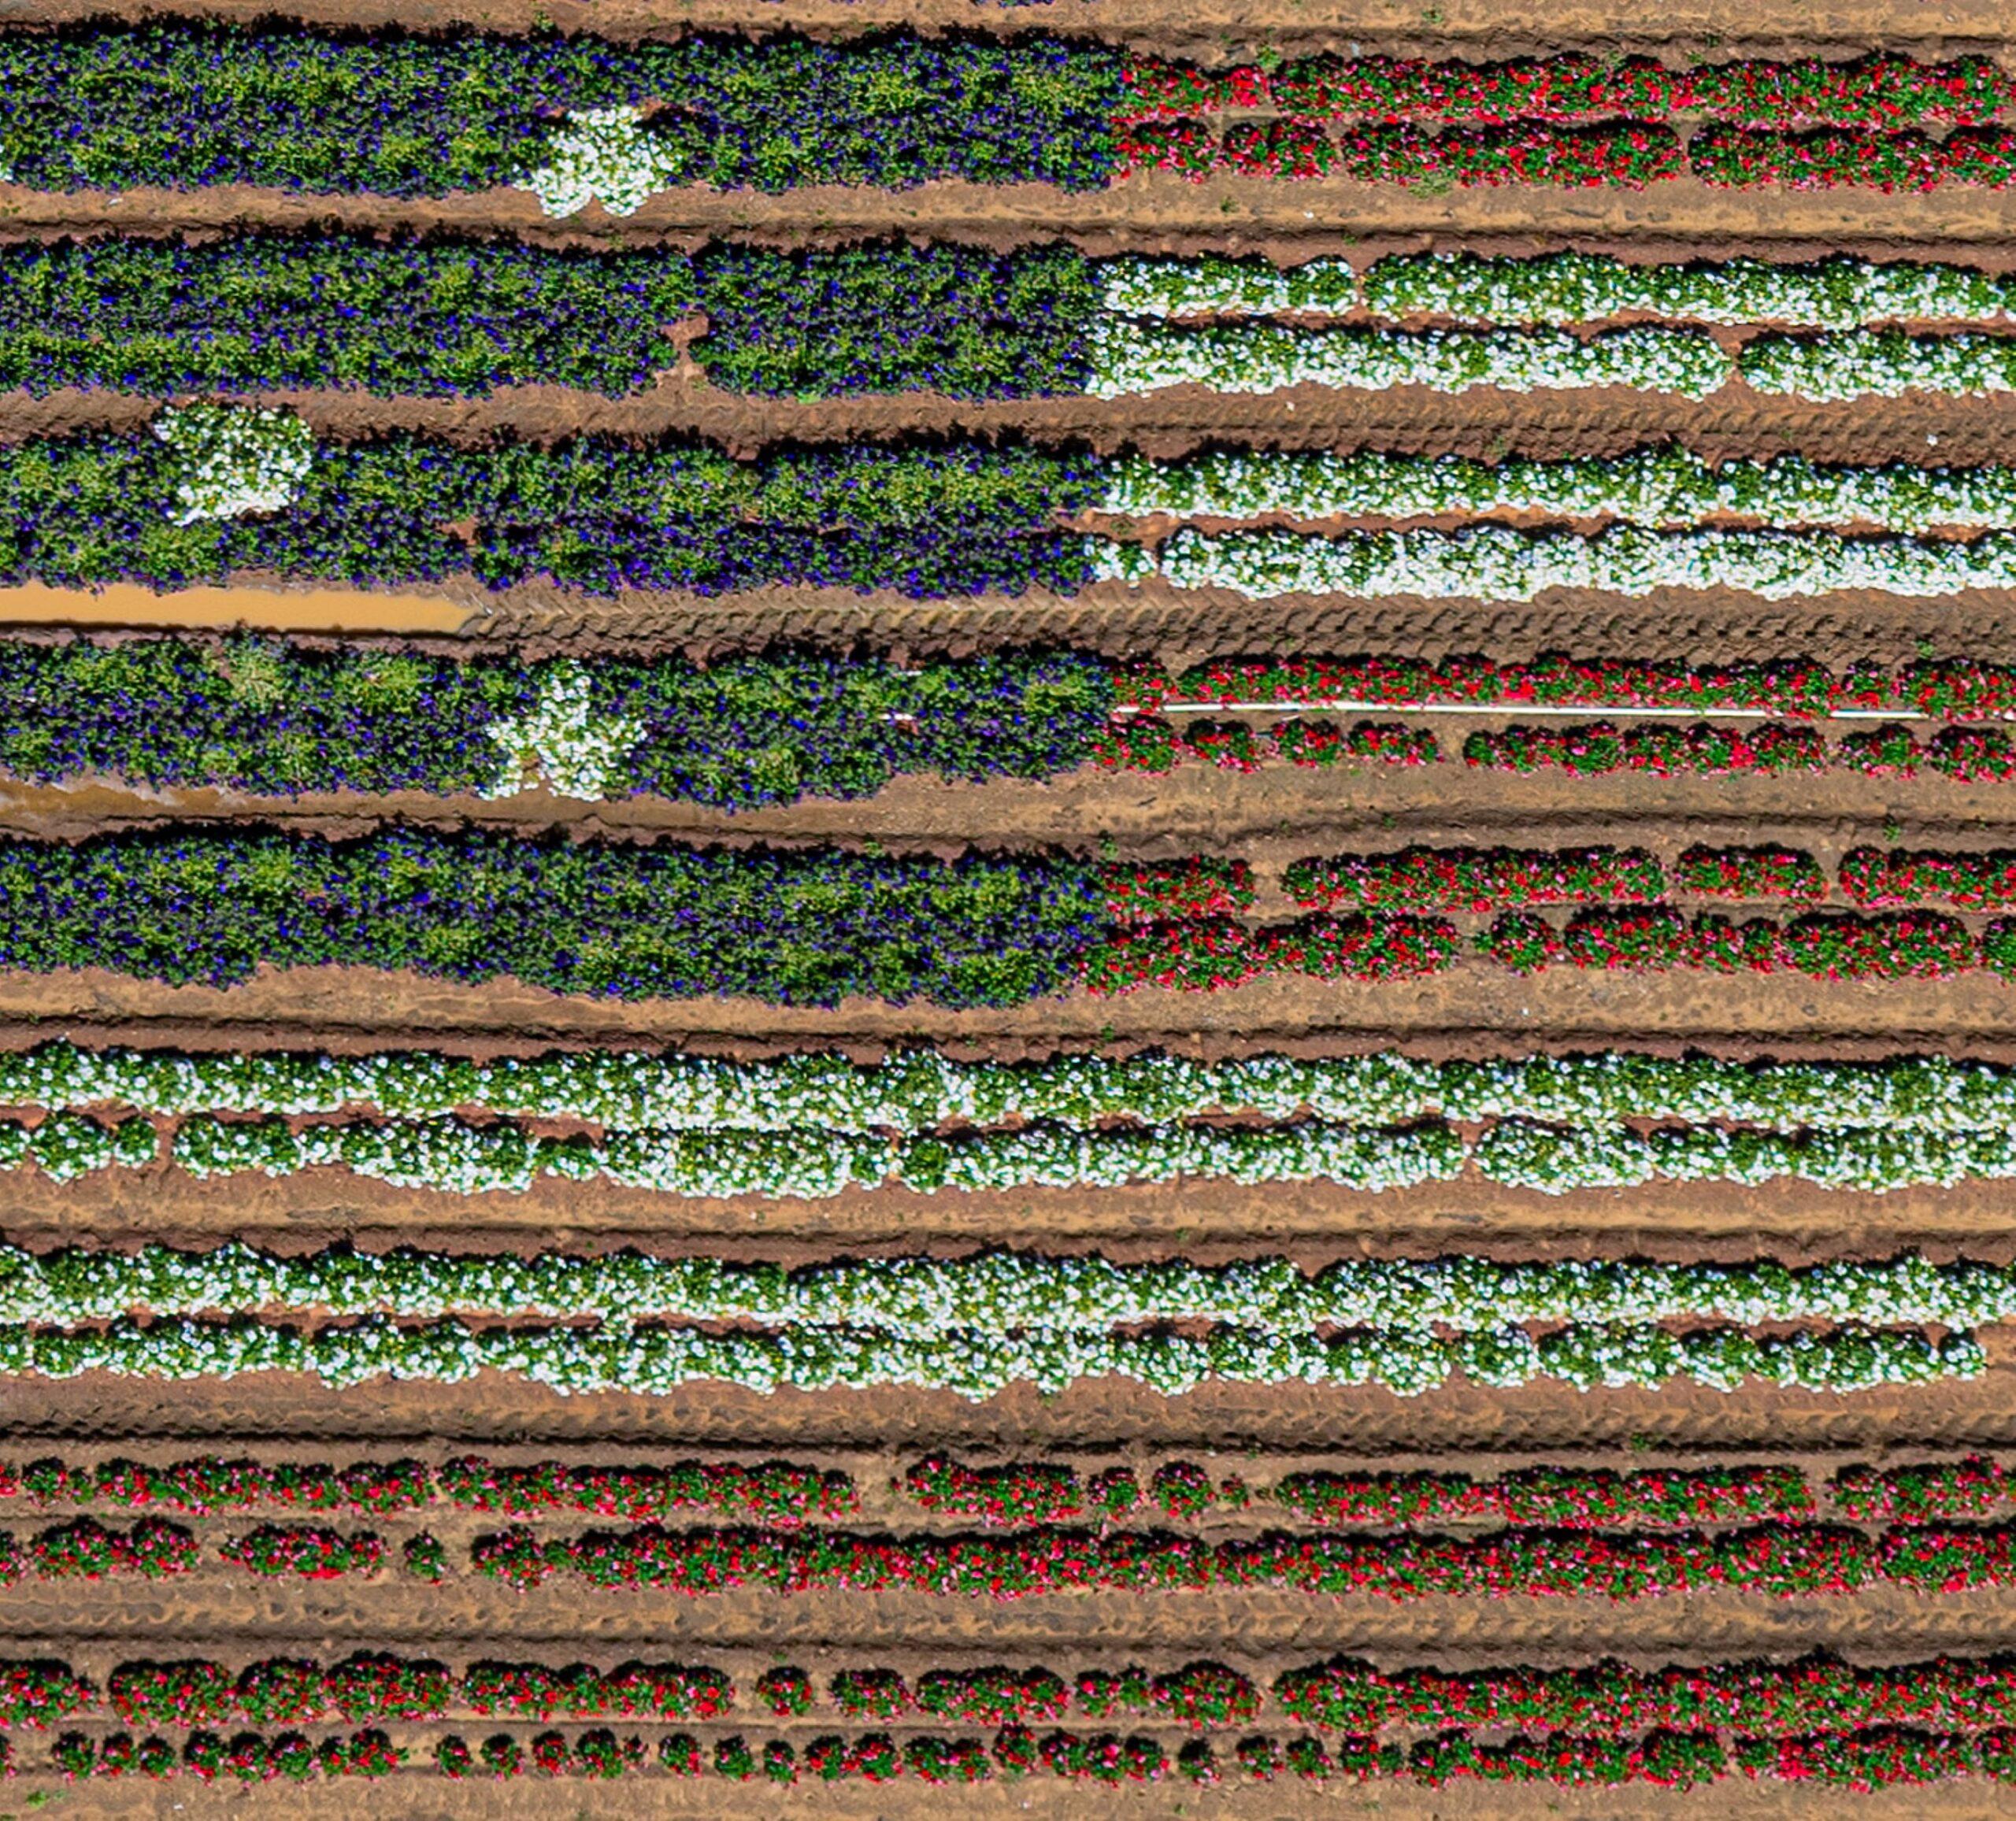 Aerial Views, California Plants 022 by Bernhard Lang - Aerial photography For Sale 5